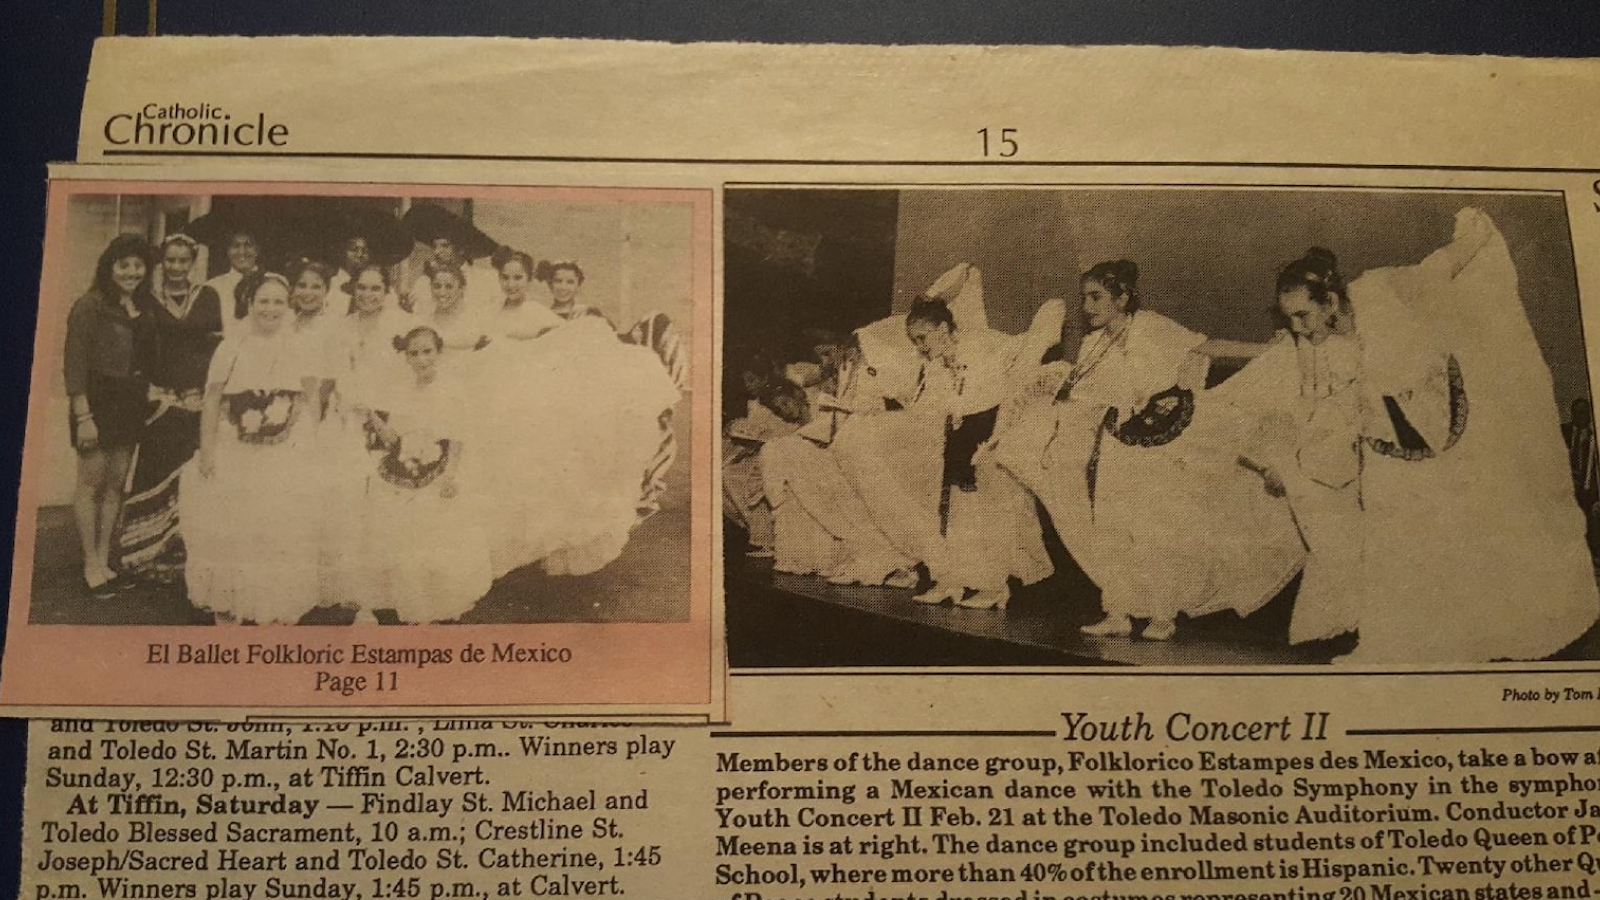 Newspaper clippings of dance troop Folklorico Estampes des Mexico